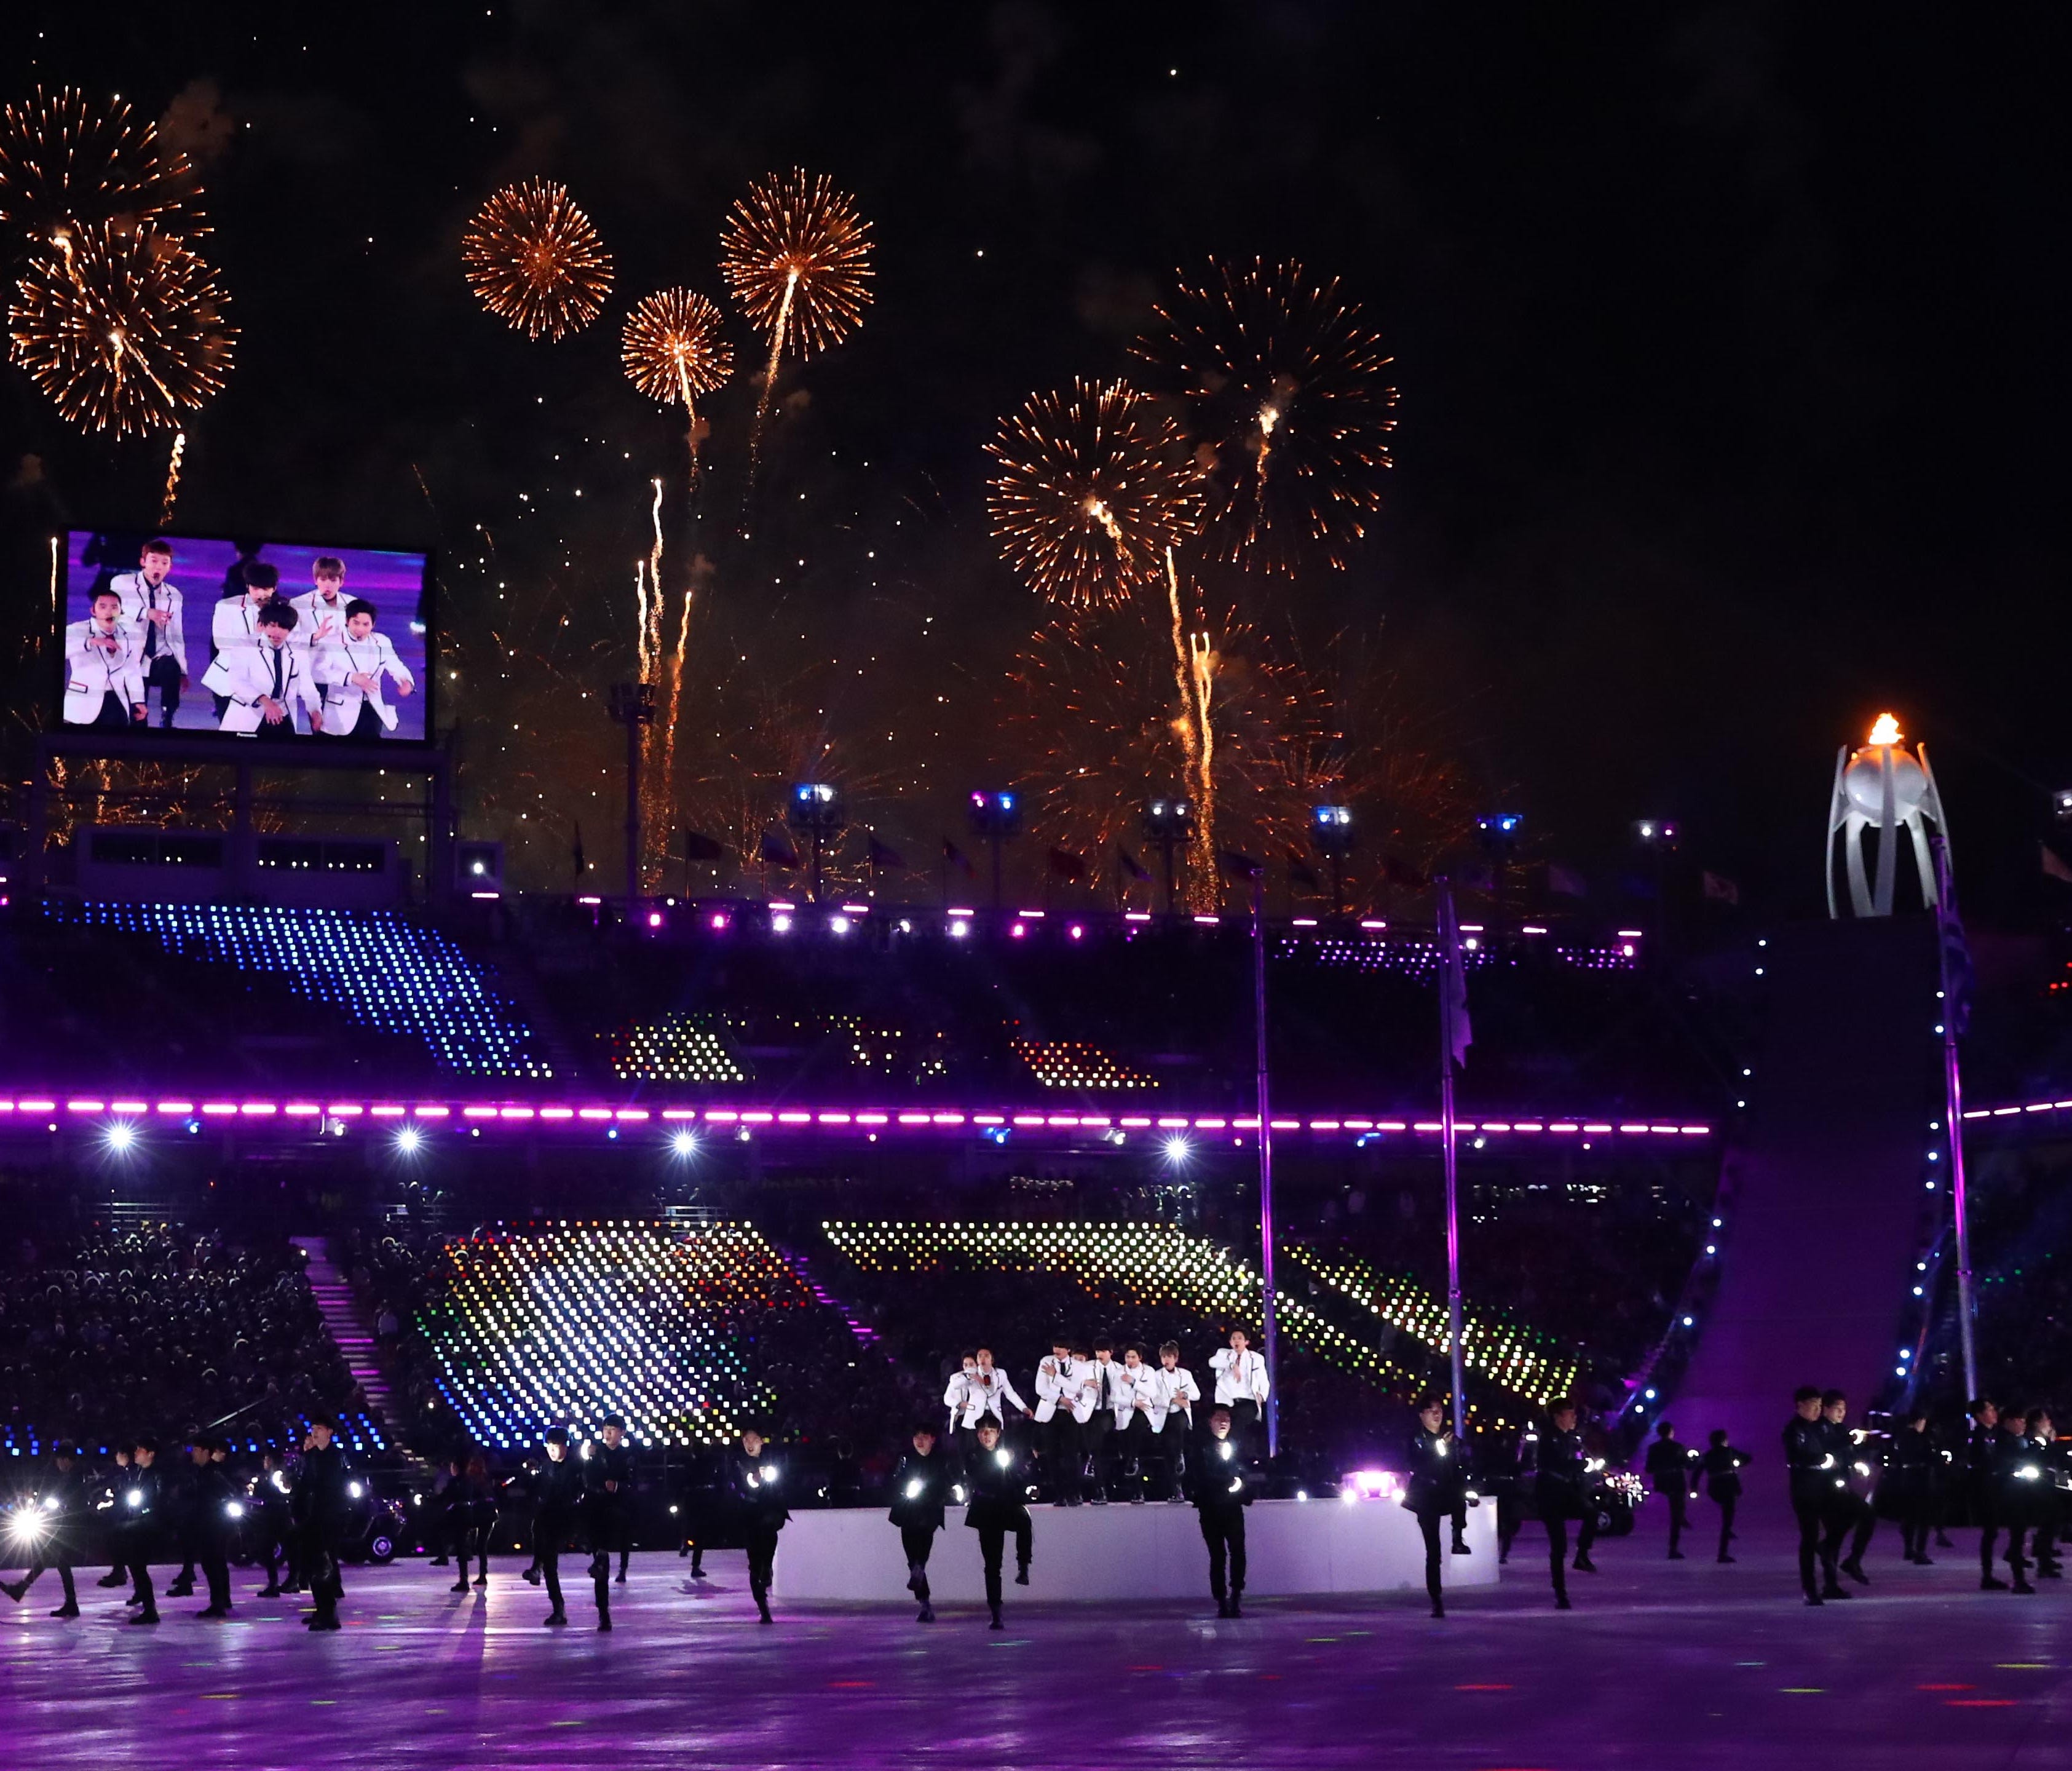 Feb 25, 2018; PyeongChang, South Korea; Fireworks during the closing ceremony for the Pyeongchang 2018 Olympic Winter Games at Pyeongchang Olympic Stadium. Mandatory Credit: Rob Schumacher-USA TODAY Sports